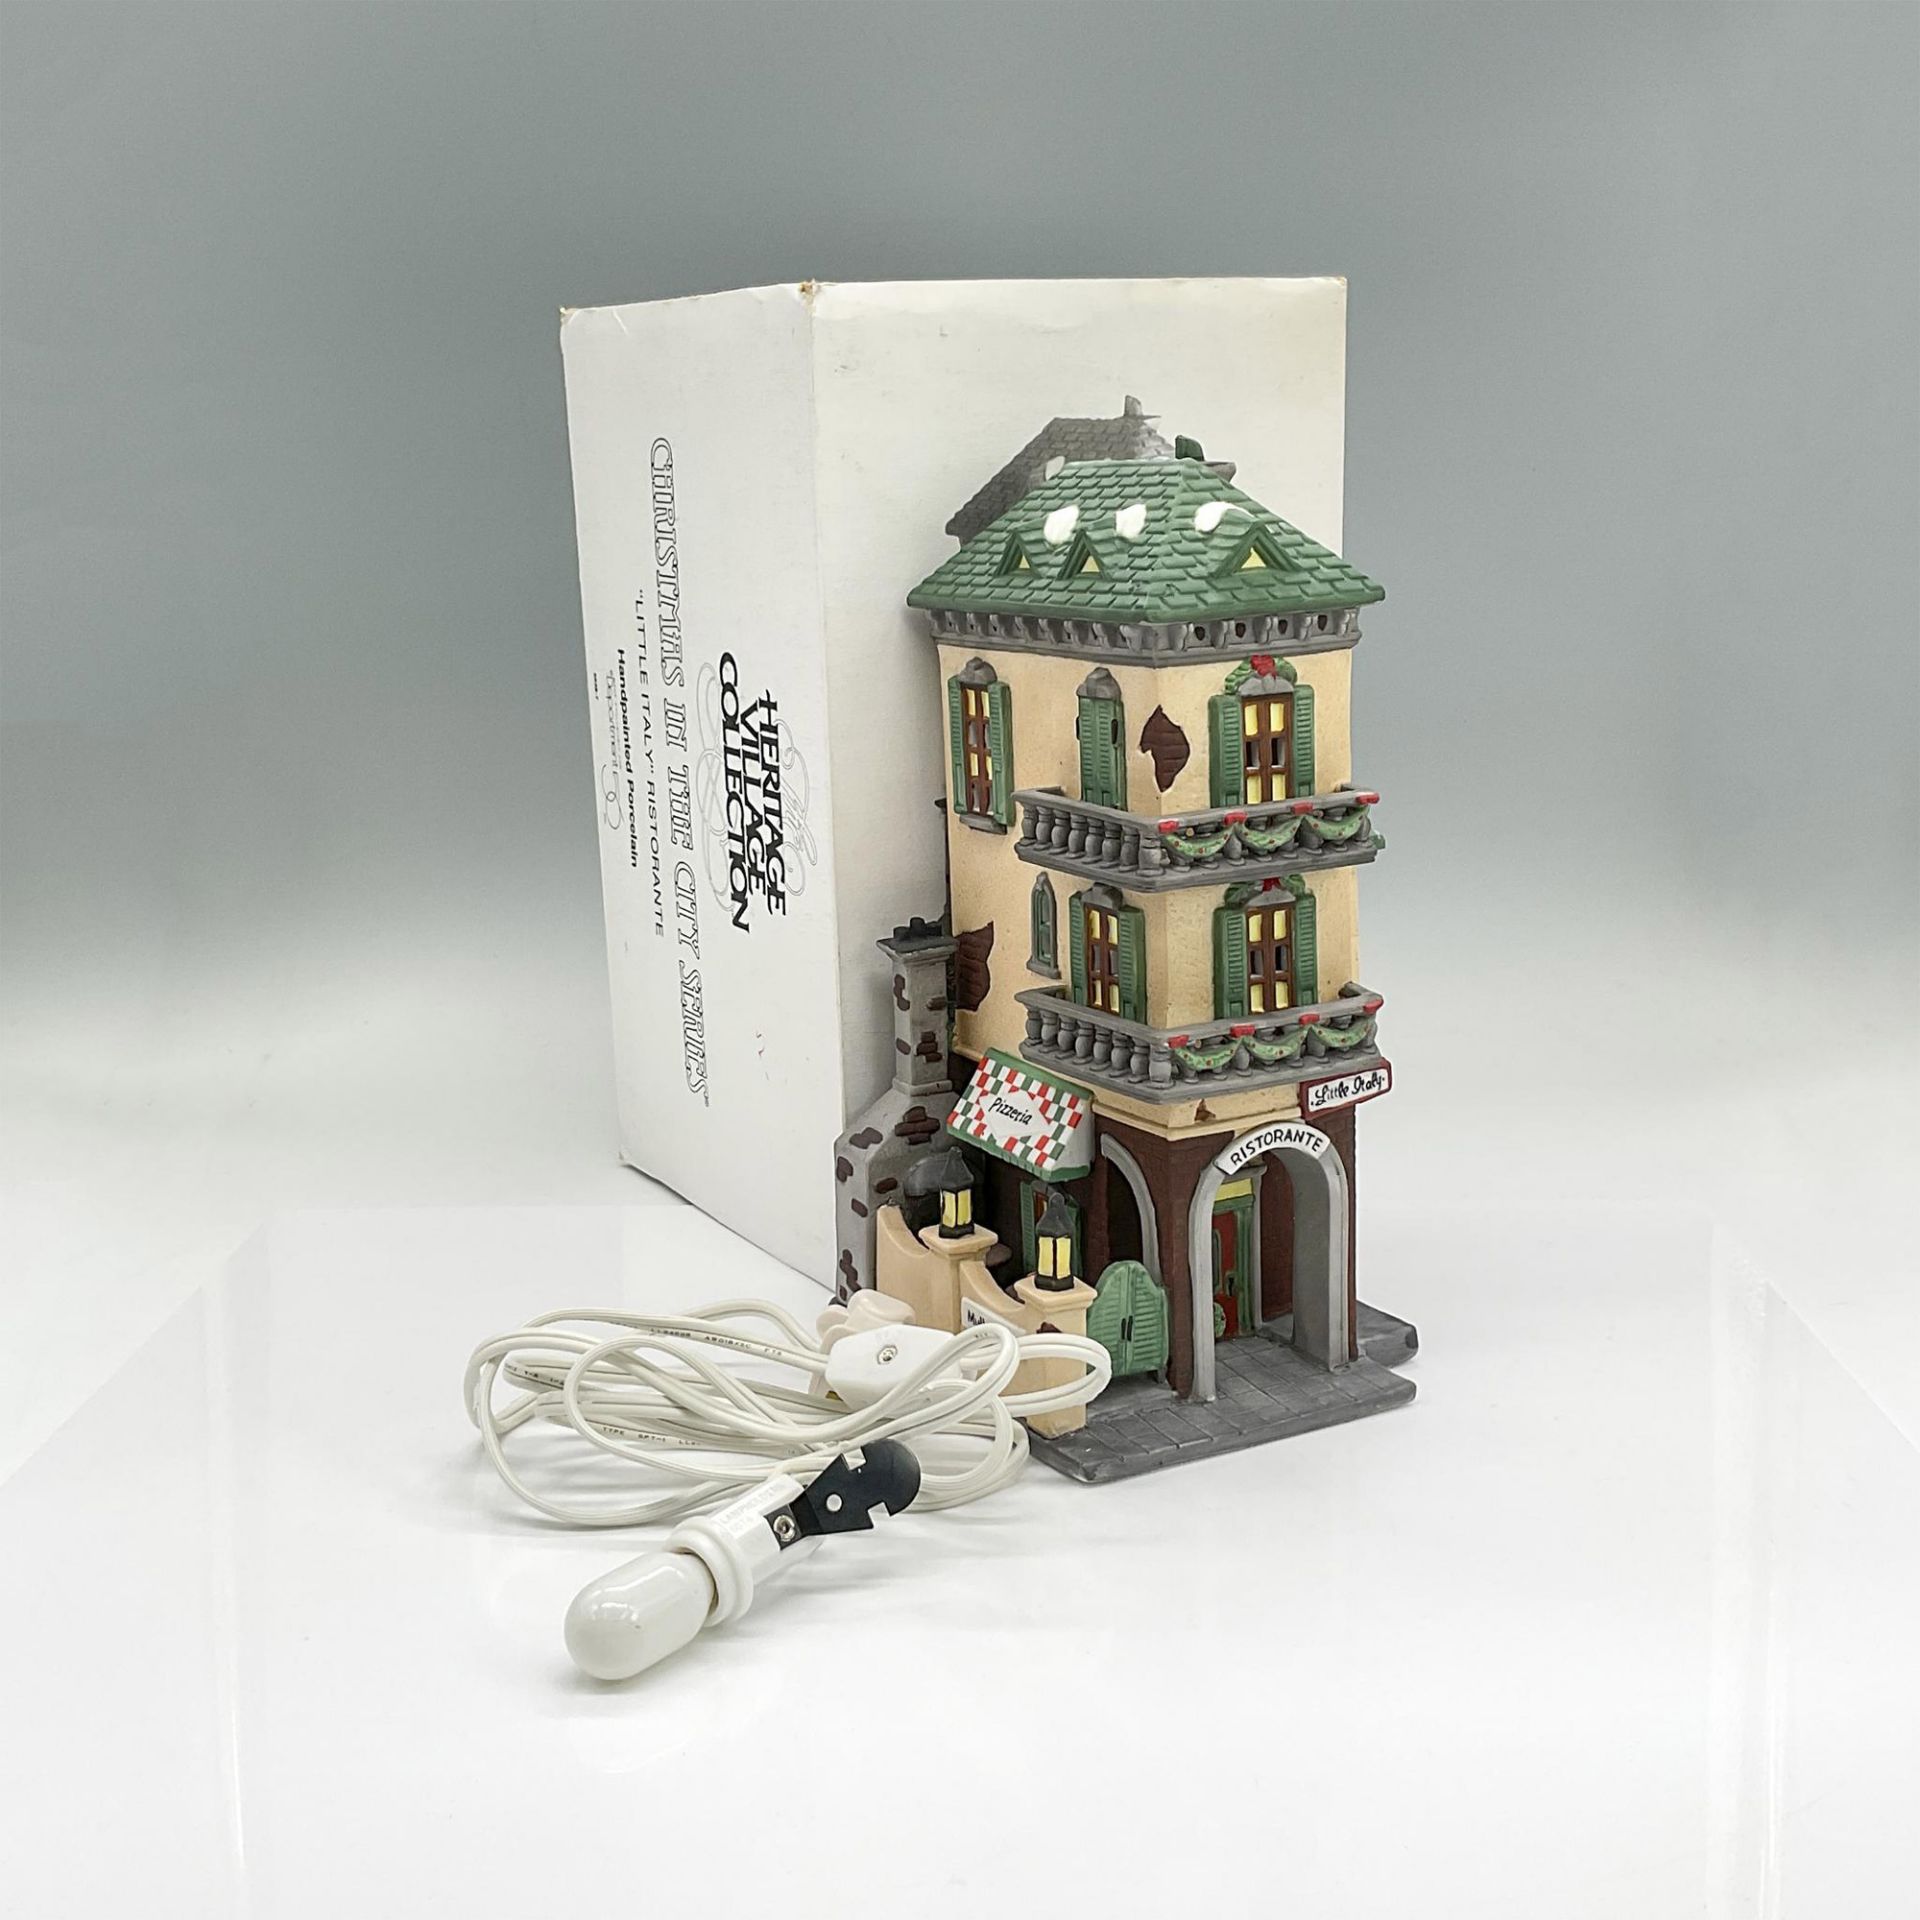 Department 56 Heritage Village Collection, Little Italy Ristorante - Image 6 of 6